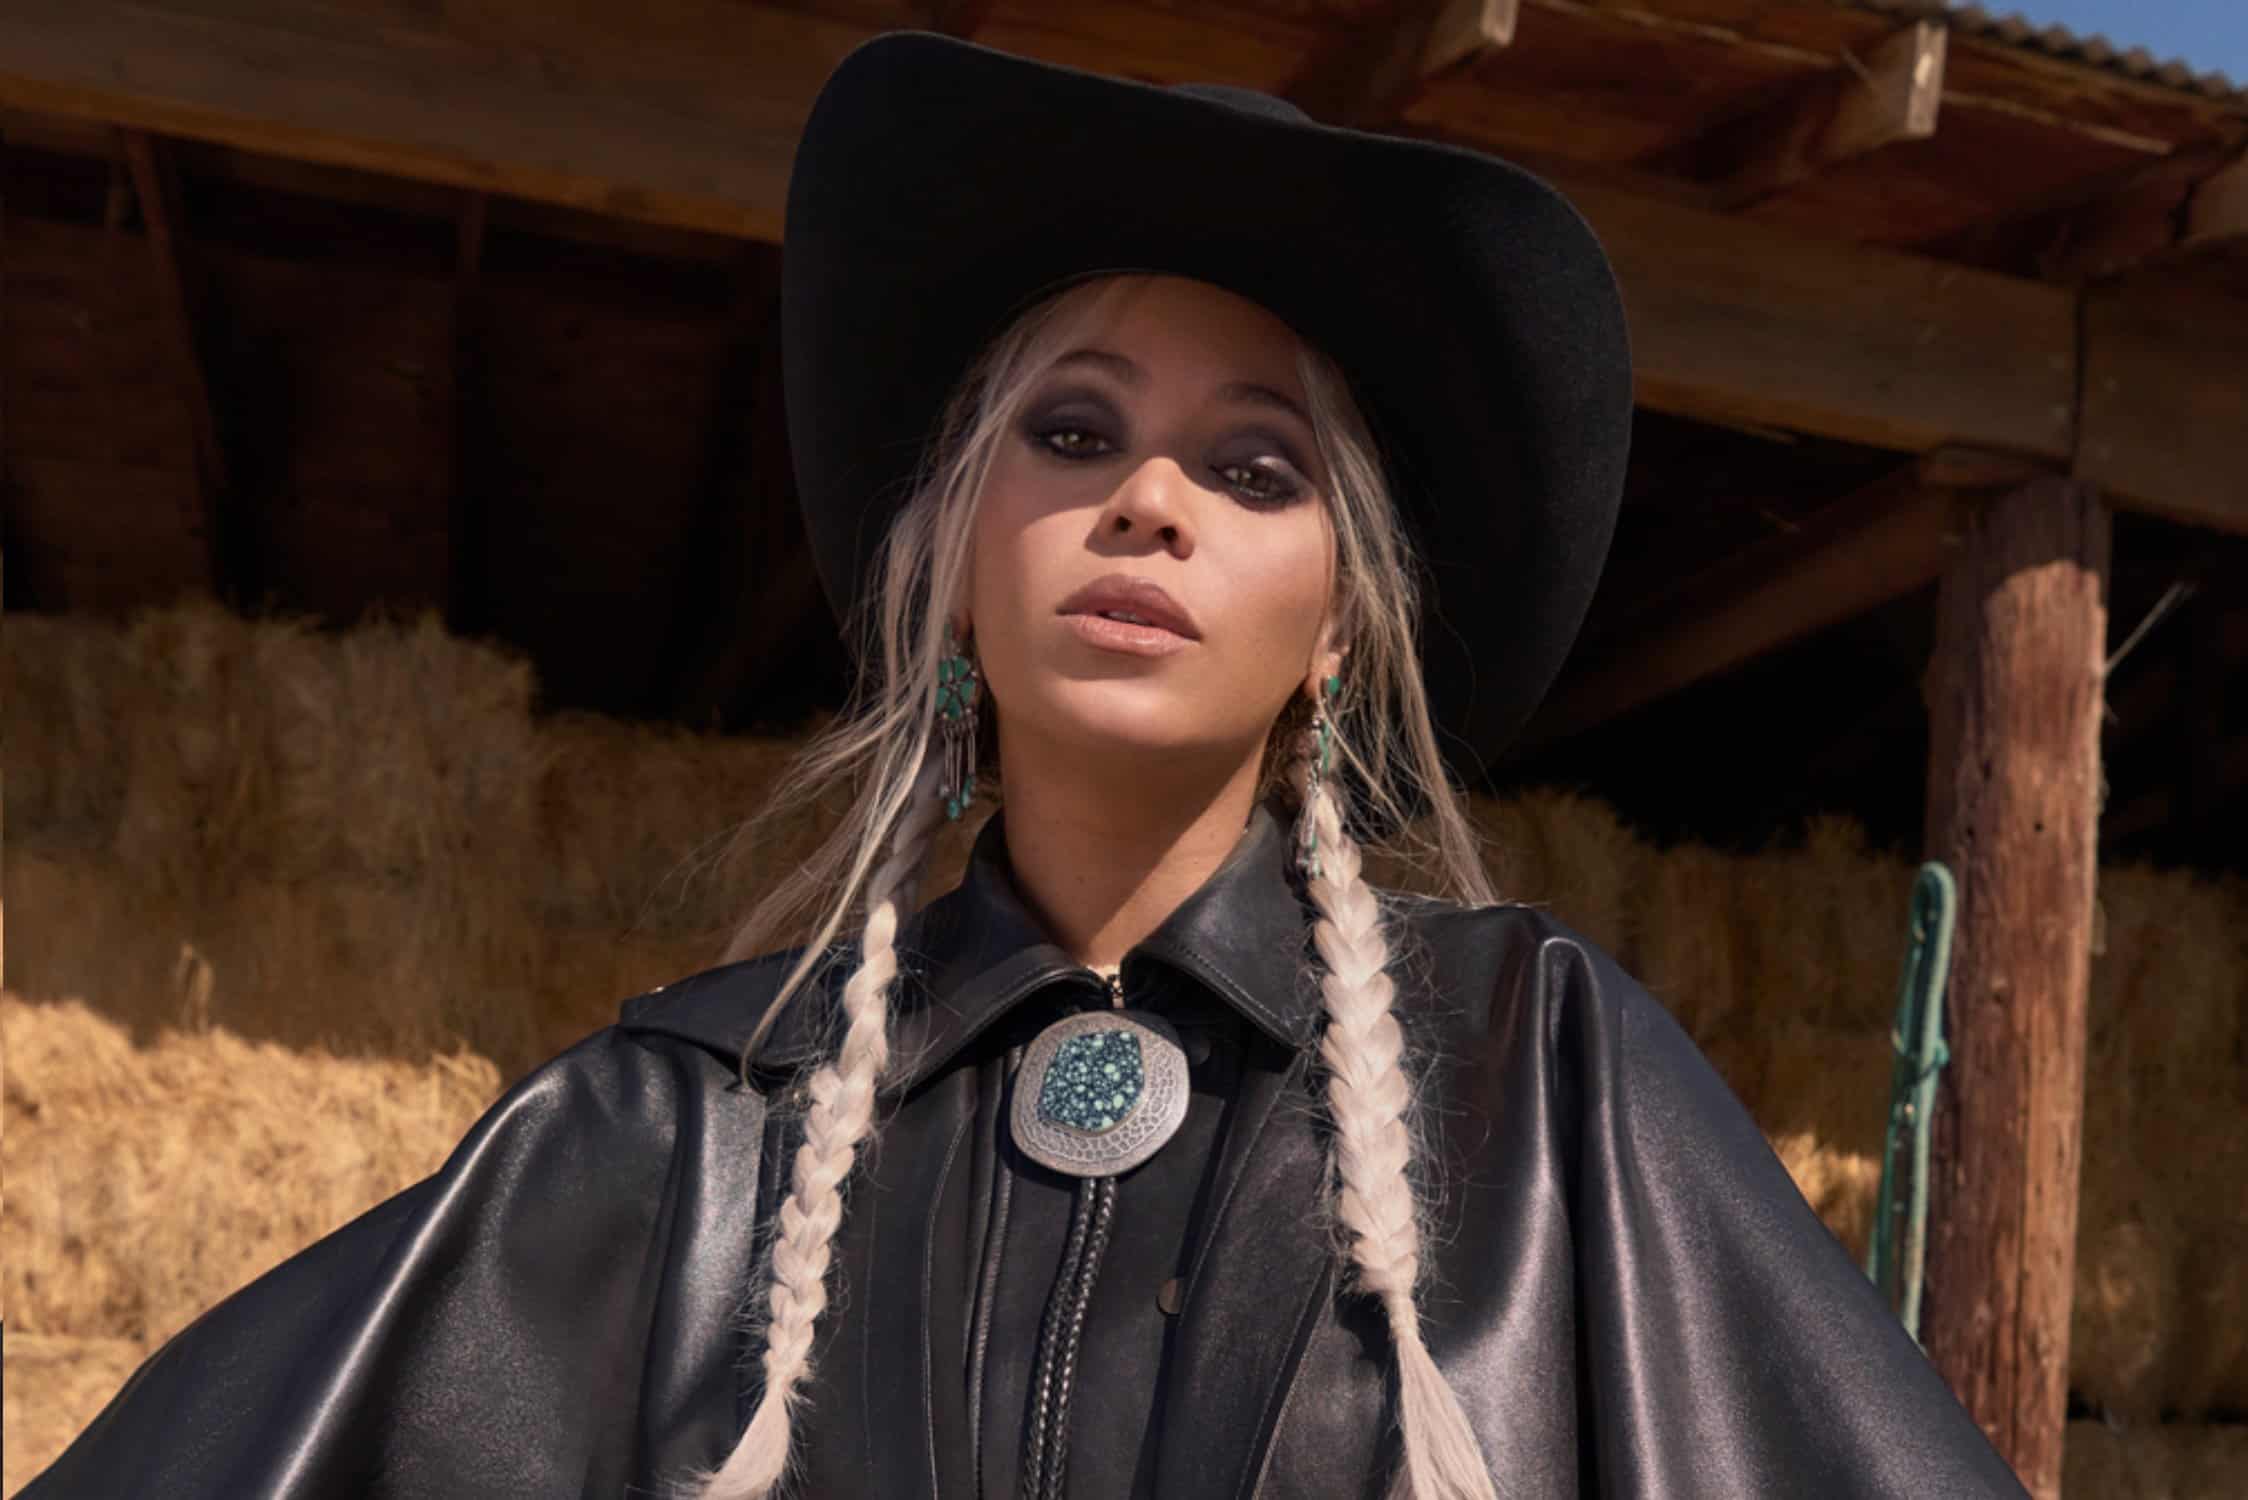 Beyoncé’s Country Album Arrives, & Chiara Ferragni is Out from Tod’s Board!